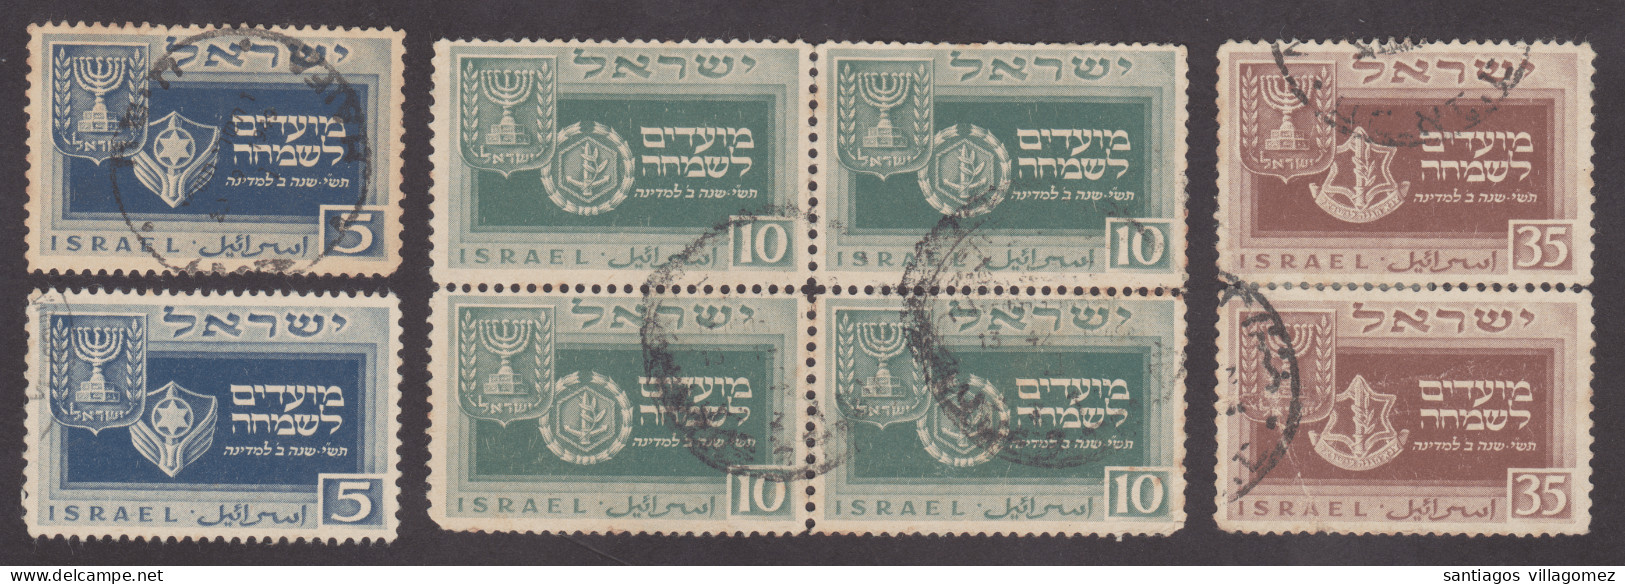 Israel 1949: 2nd Jewish Festival. Full Set In Block Of 4 10C. & Pairs 5 - 35 Cents - Gebraucht (ohne Tabs)